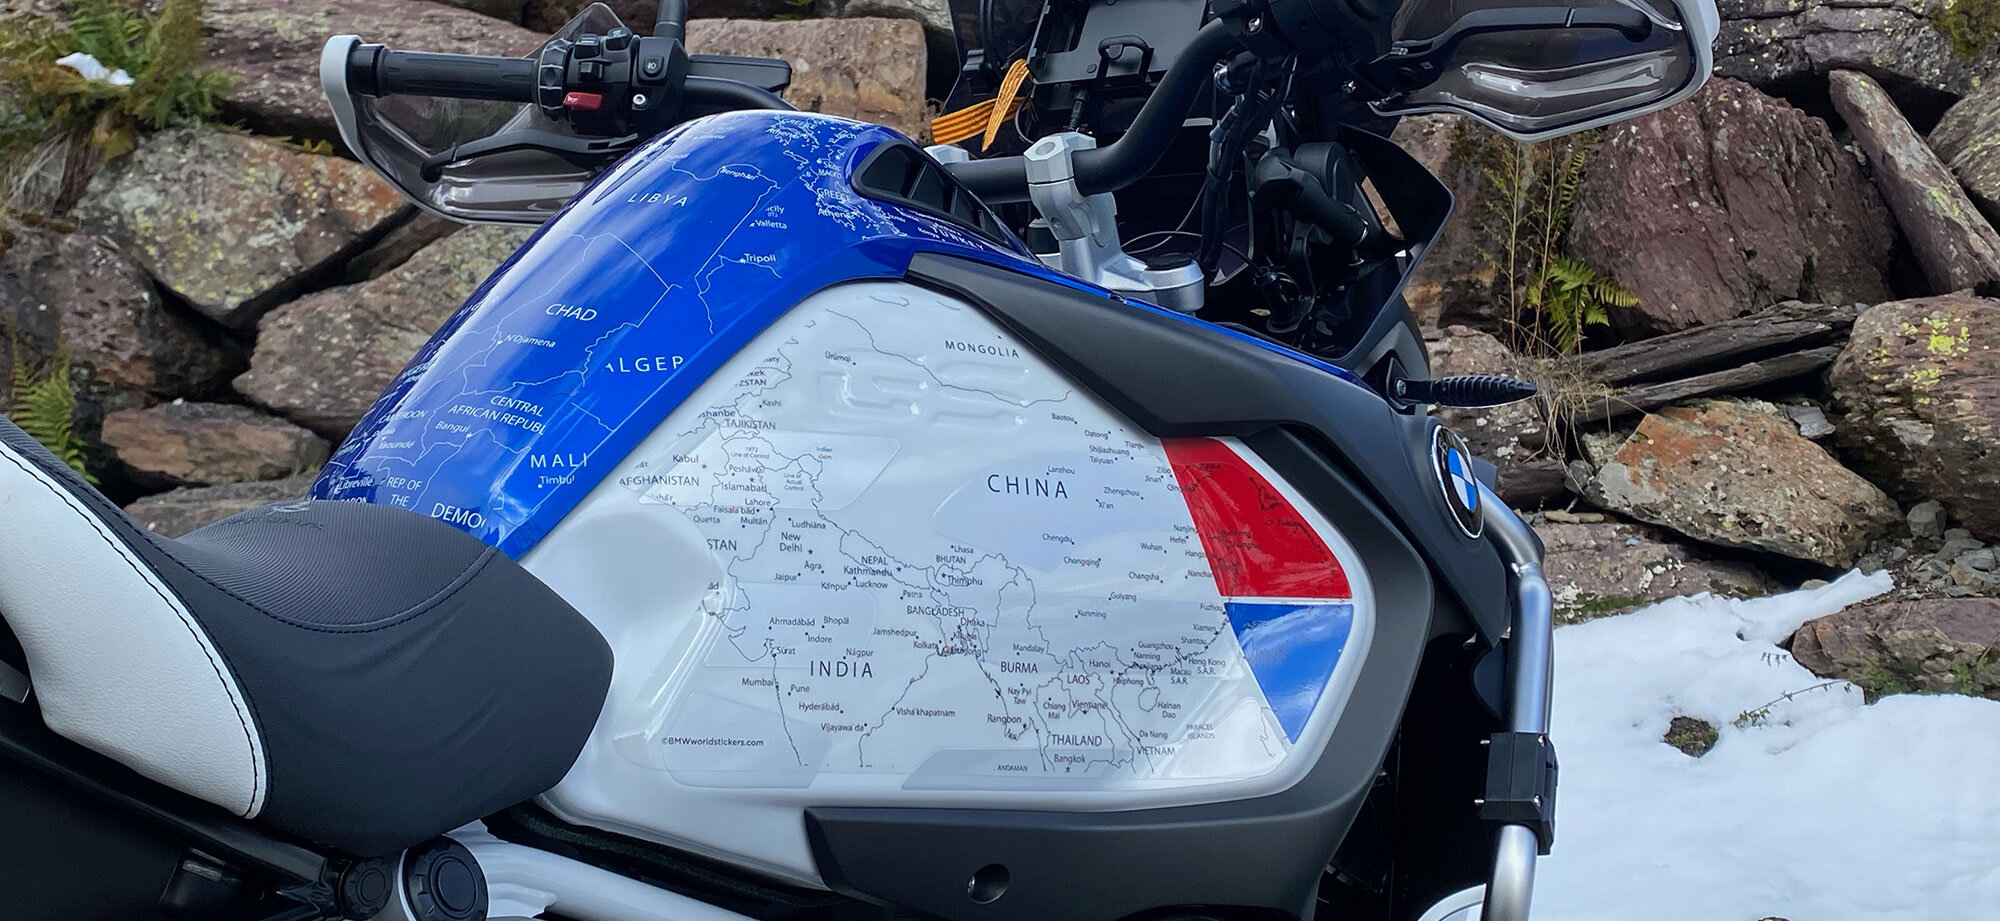 BMW R1250GS LC Adv Rallye/ 40 years 20-on Tank World Map Stickers Decals  Graphic by BMWworldstickers — BMW GS/ RT Protection Film Tank Map Decals  Stickers Graphics